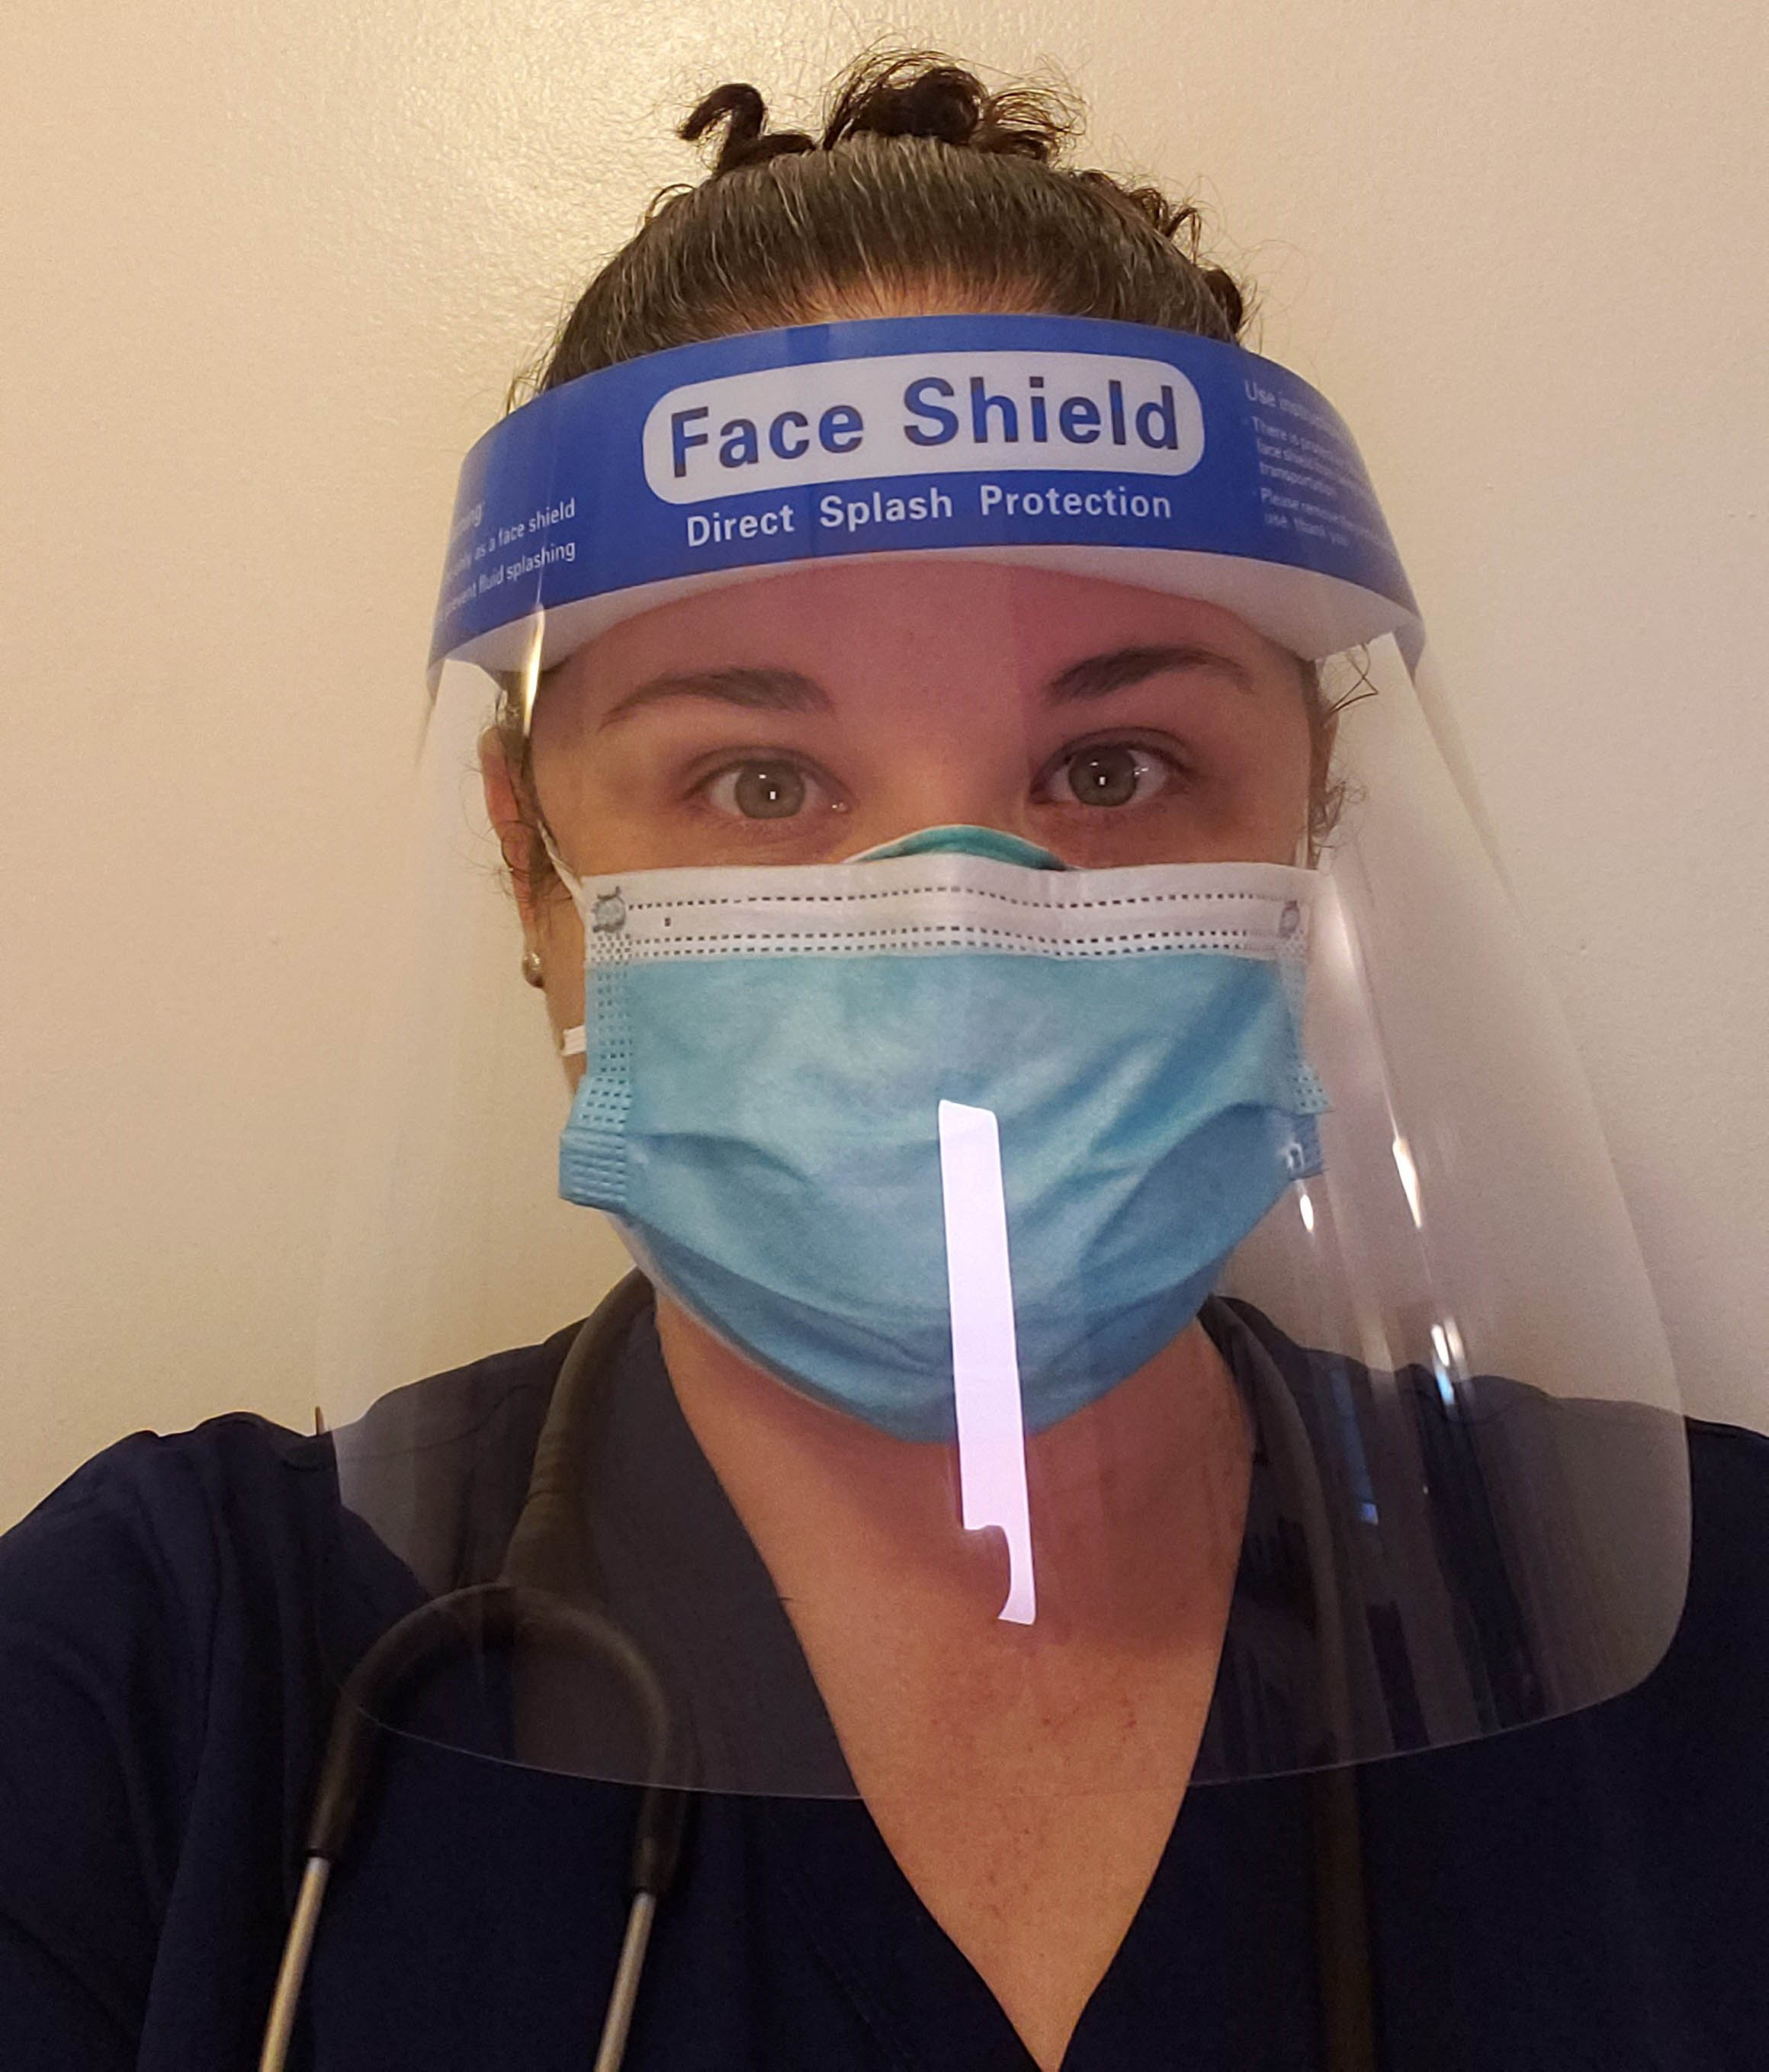 A nurse is seeing wearing a face shield and mask